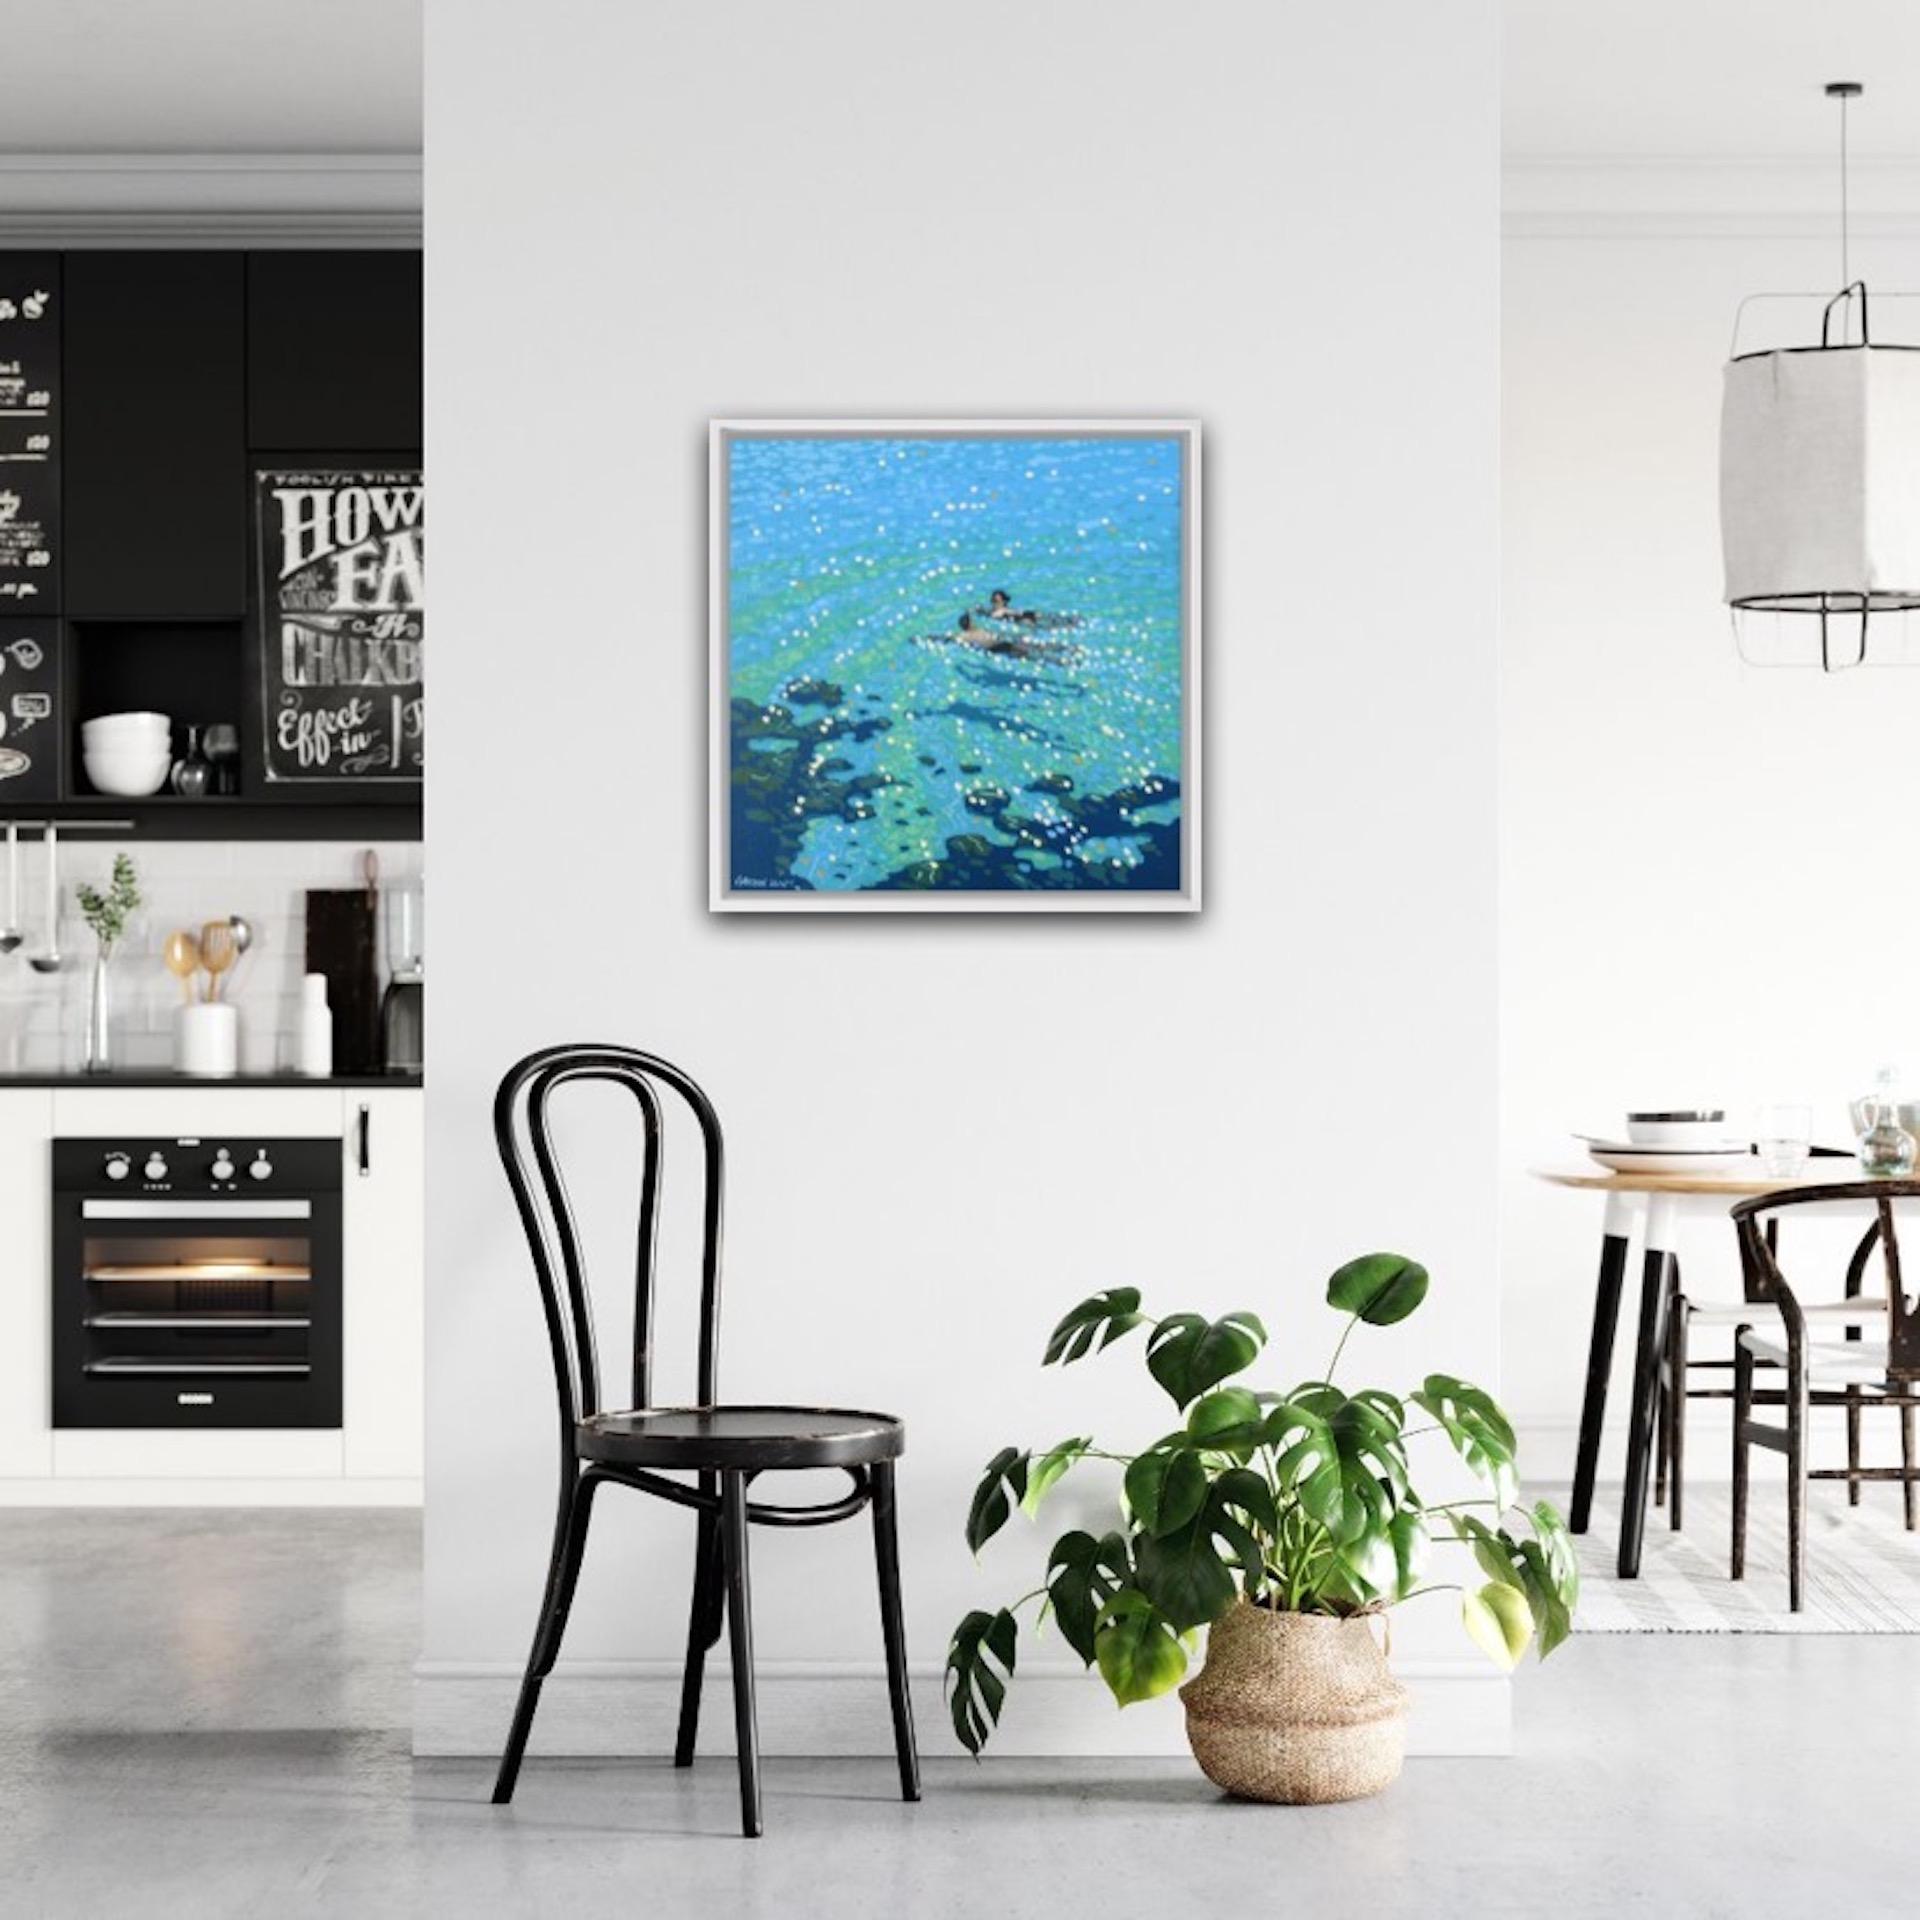 Gordon Hunt
Chit Chat Swim
Original Seascape Painting
Oil Paint on Deep Edge Canvas
Size: 50 cm x 50 cm x 4 cm
Sold Unframed
Please note that in situ images are purely an indication of how a piece may look.

‘Chit chat swim’ is an original seascape